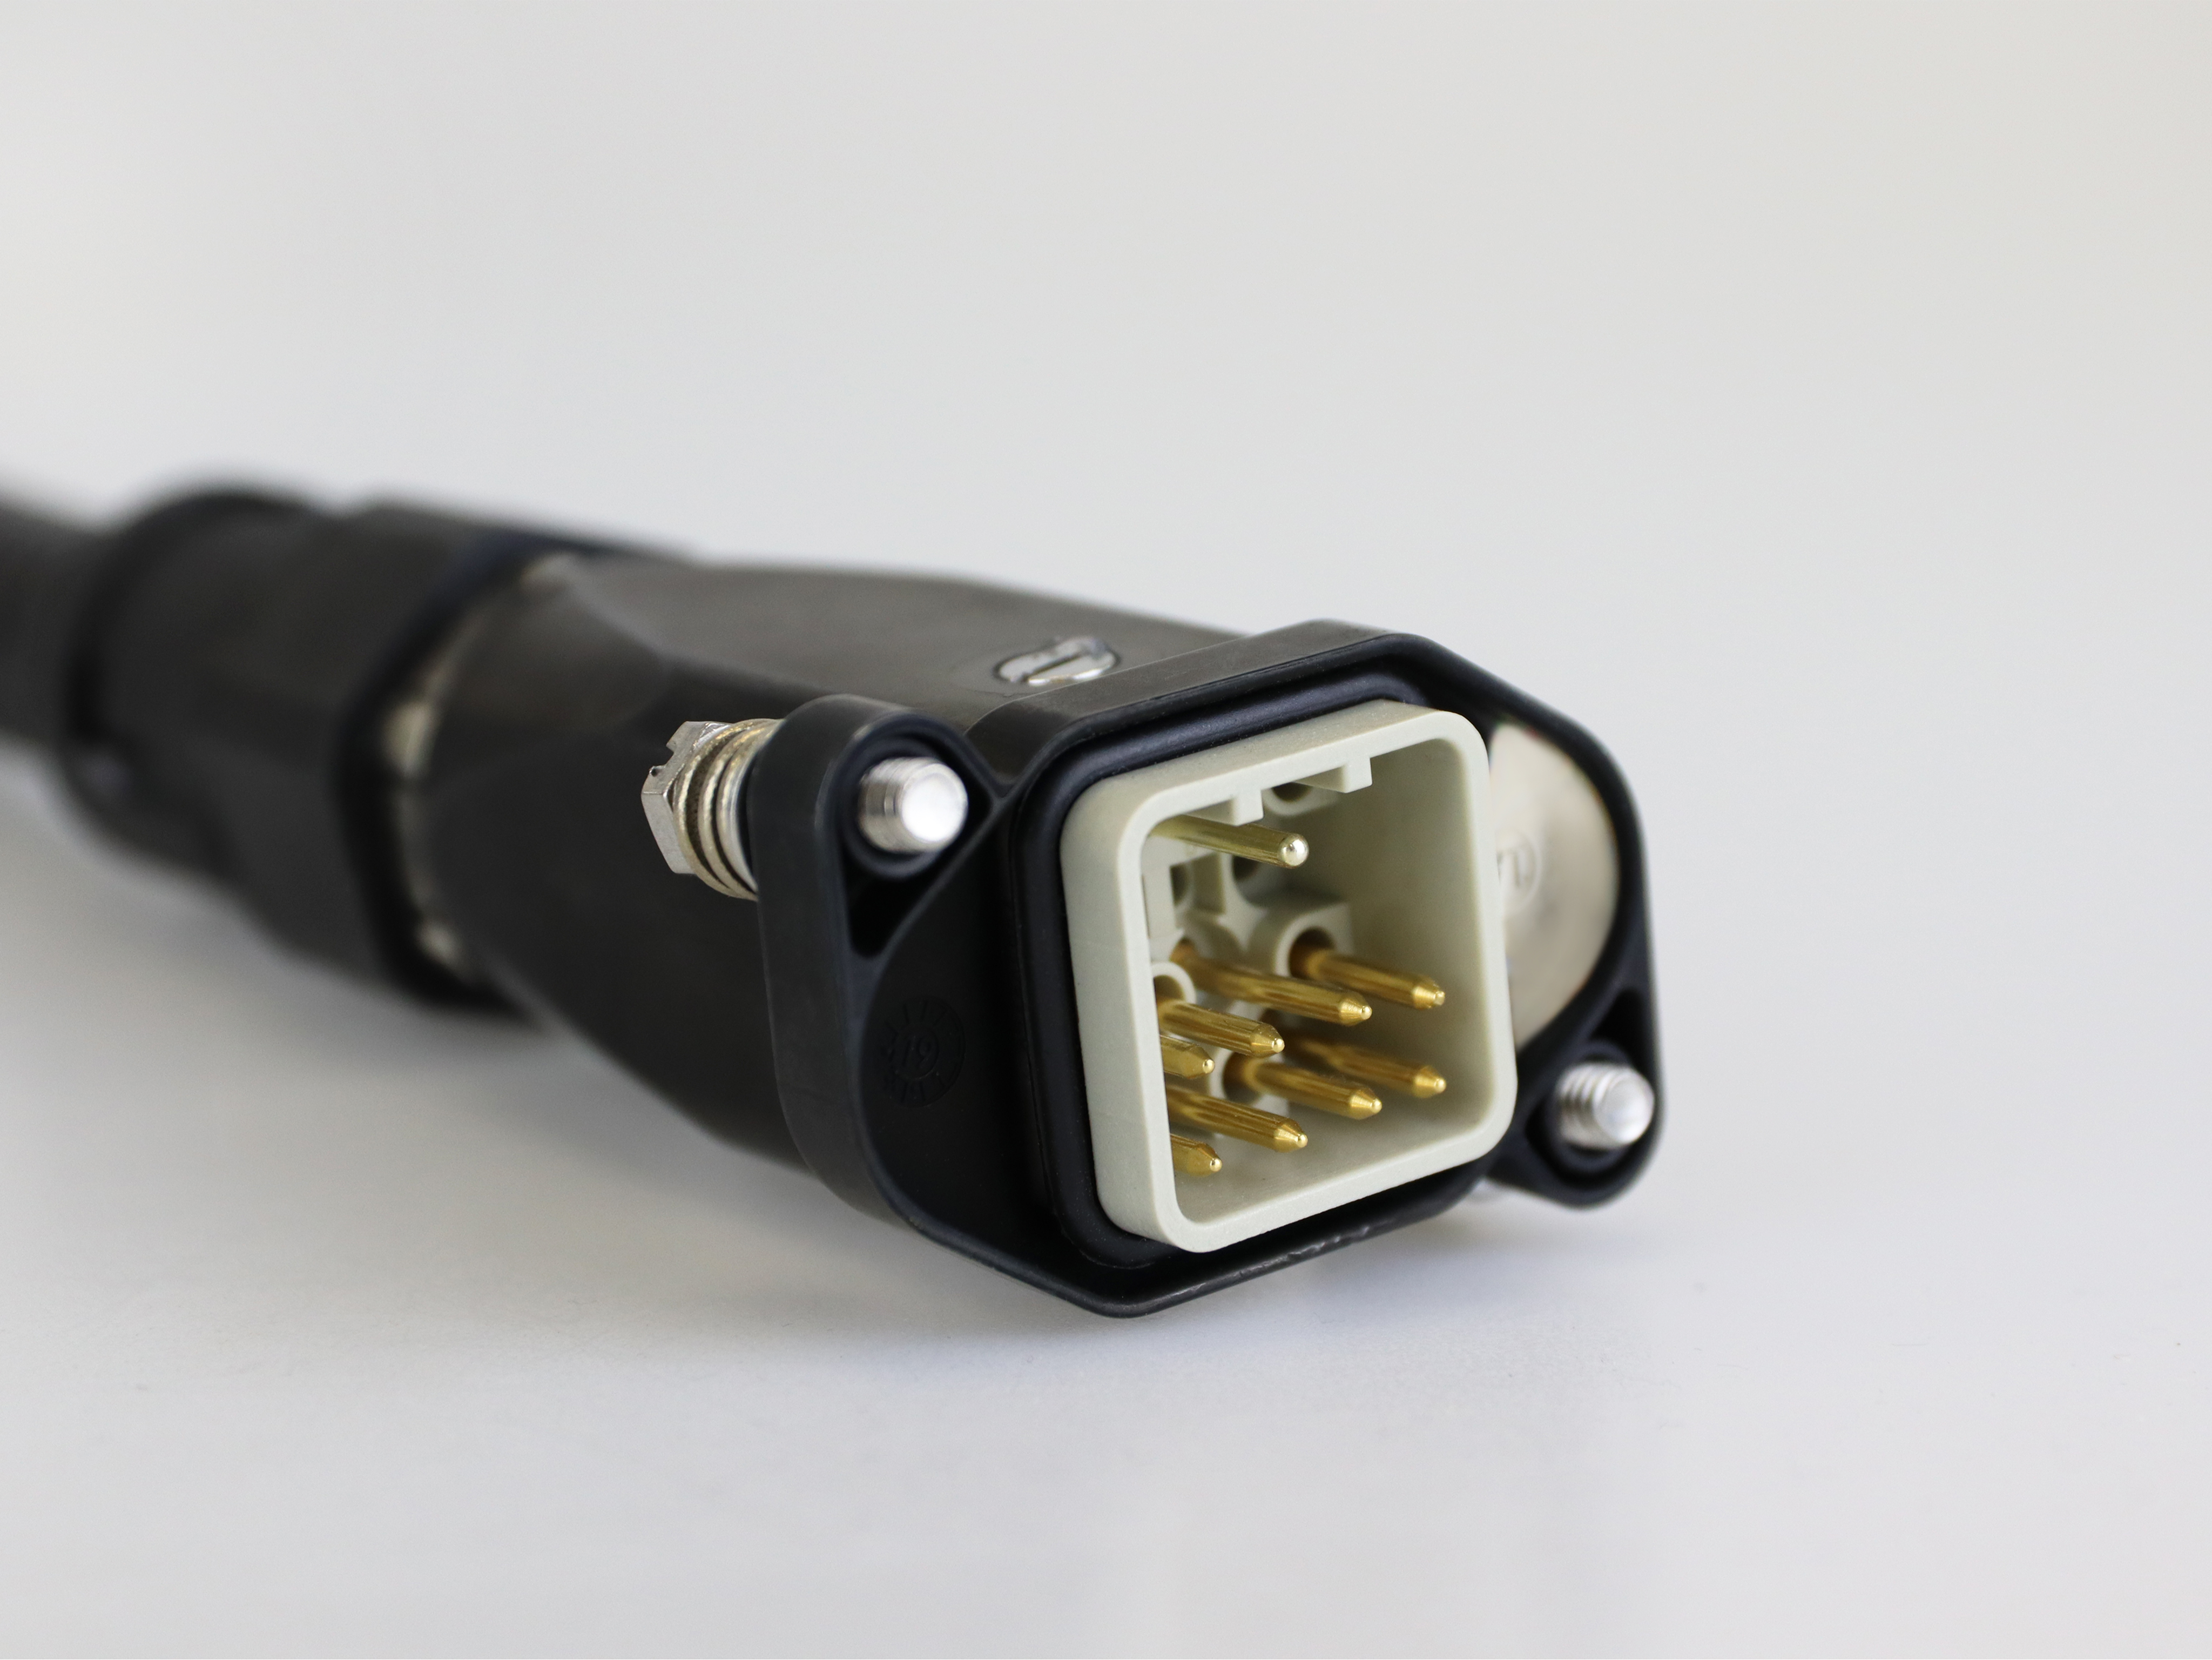 The image shows a male connector plug on a grey background